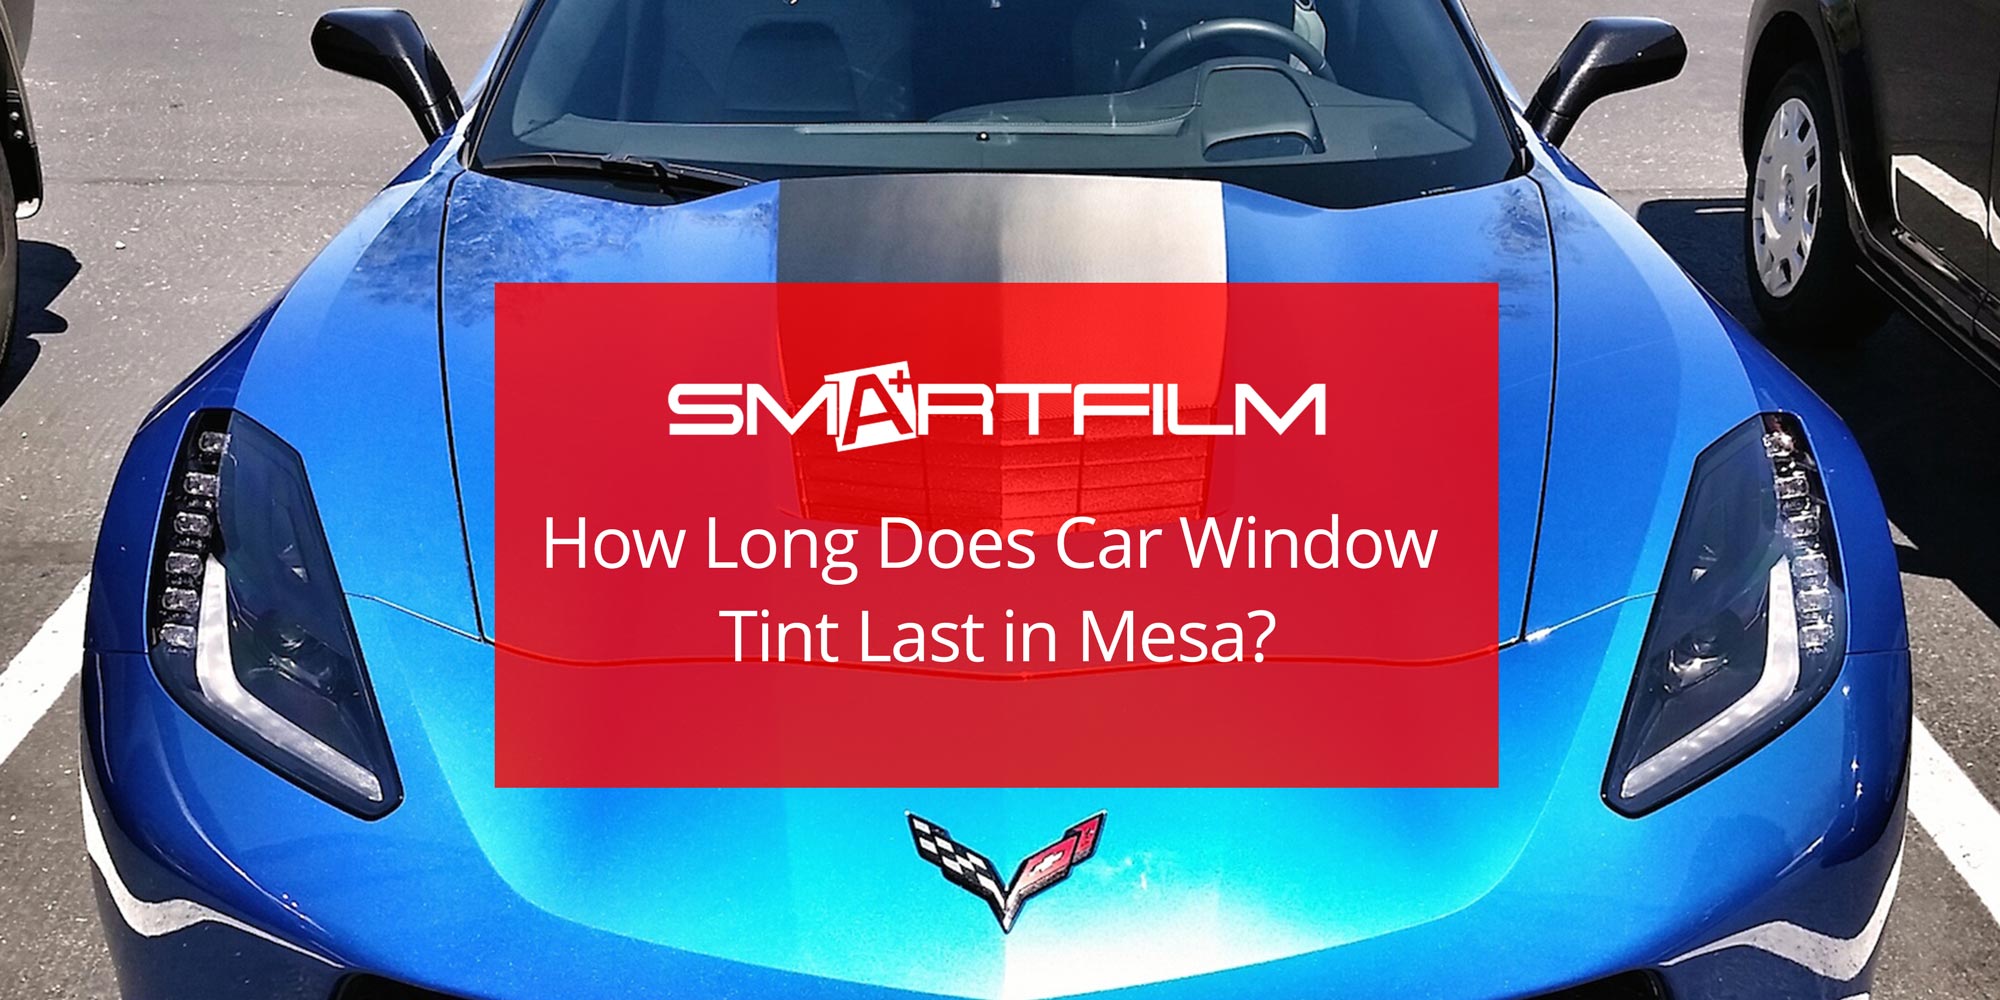 How Long Does Car Window Tint Last in Mesa?